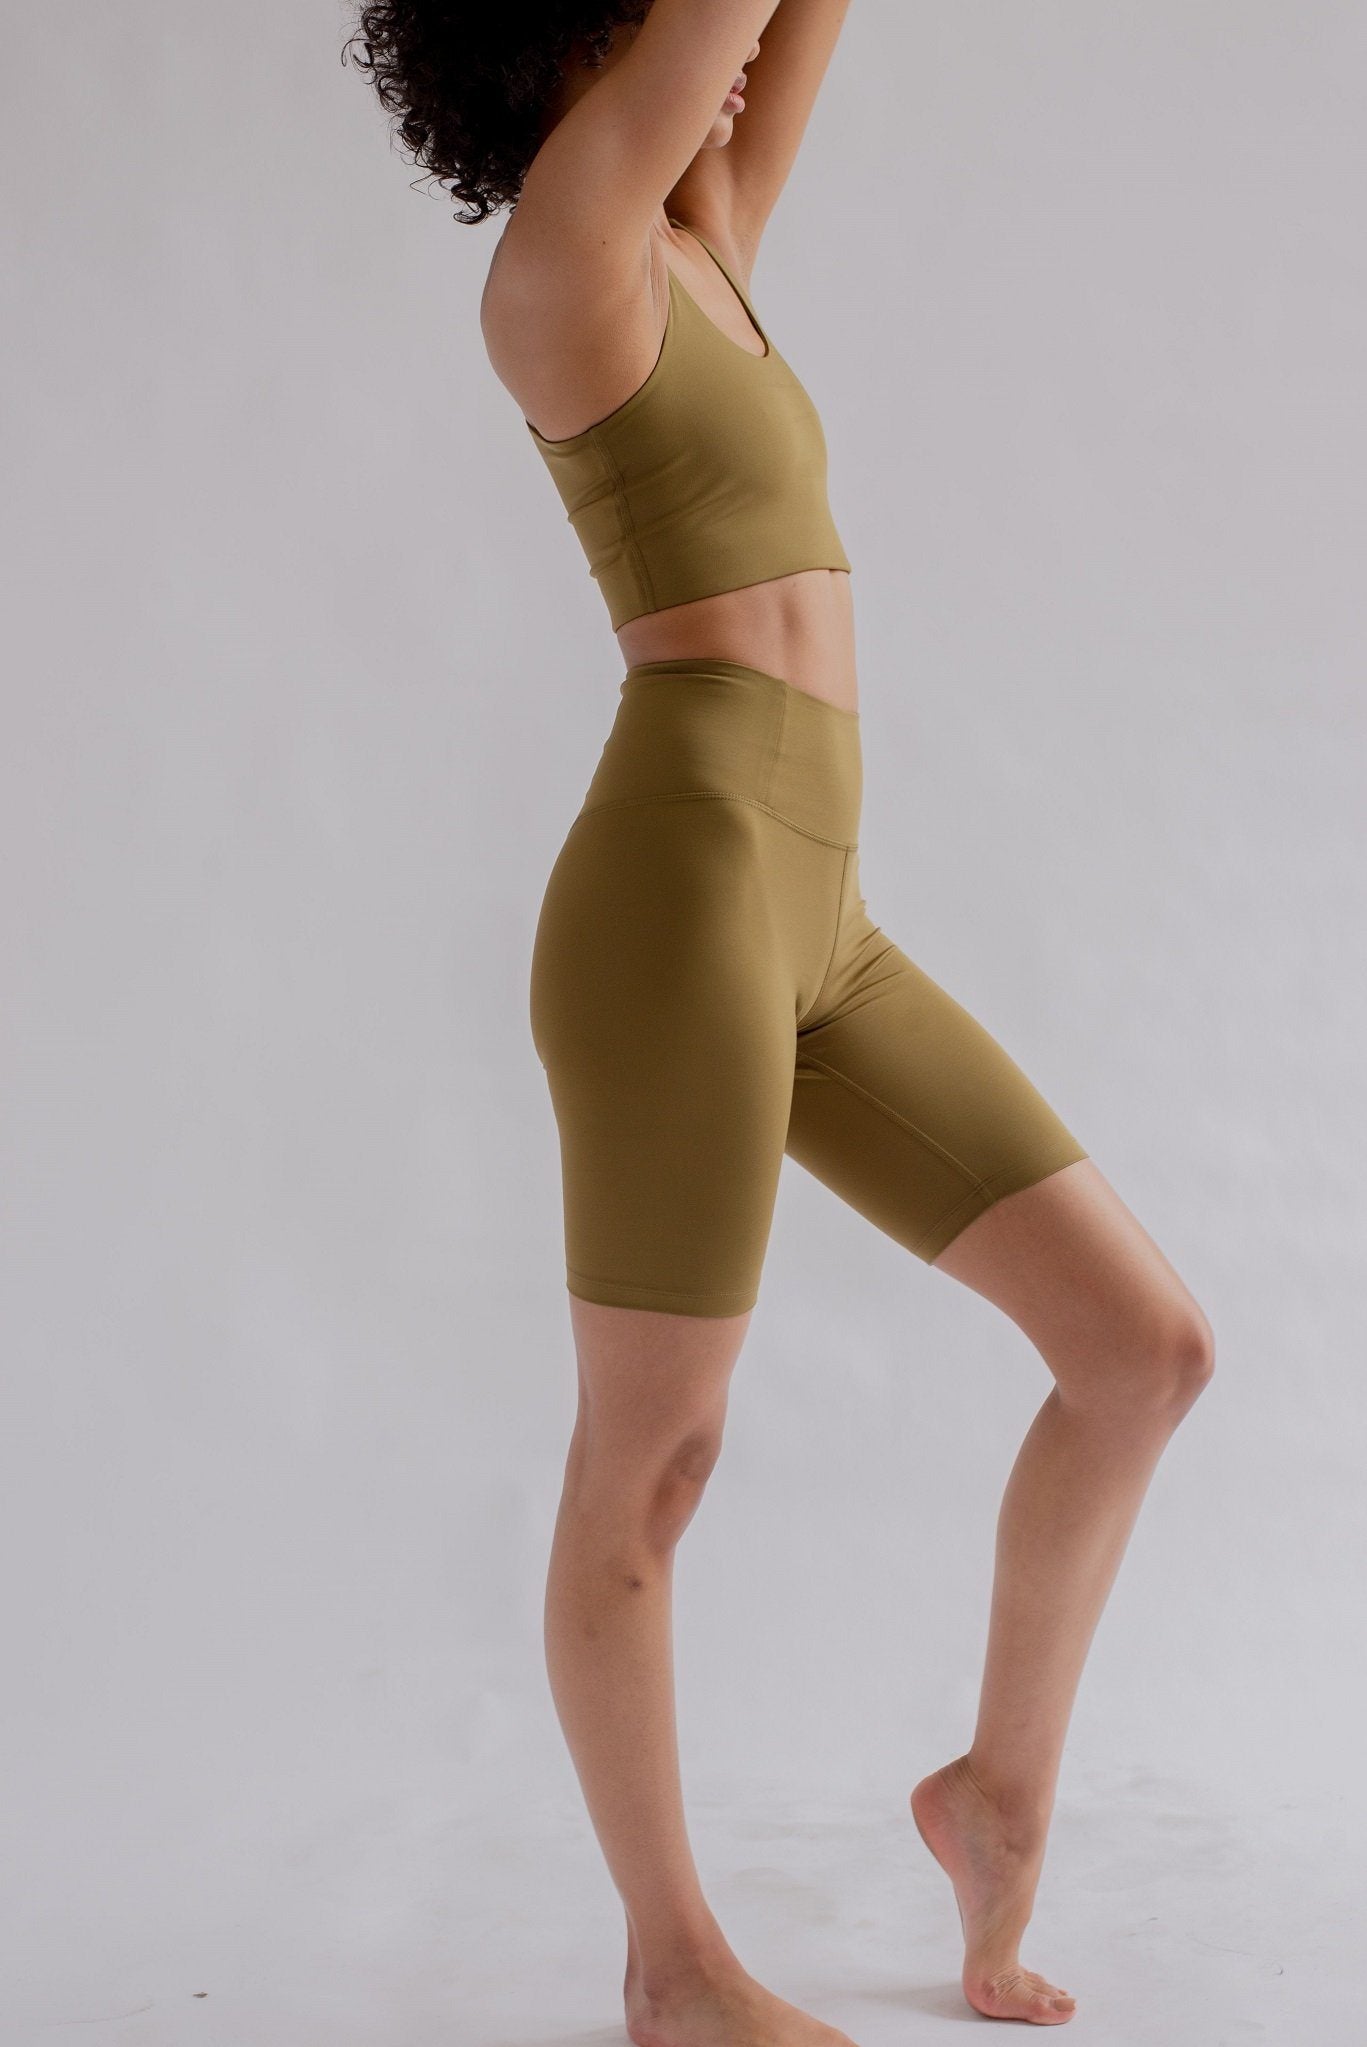 Girlfriend Collective W's Float High-Rise Bike Shorts - Made from recycled plastic bottles Fern XS Pants